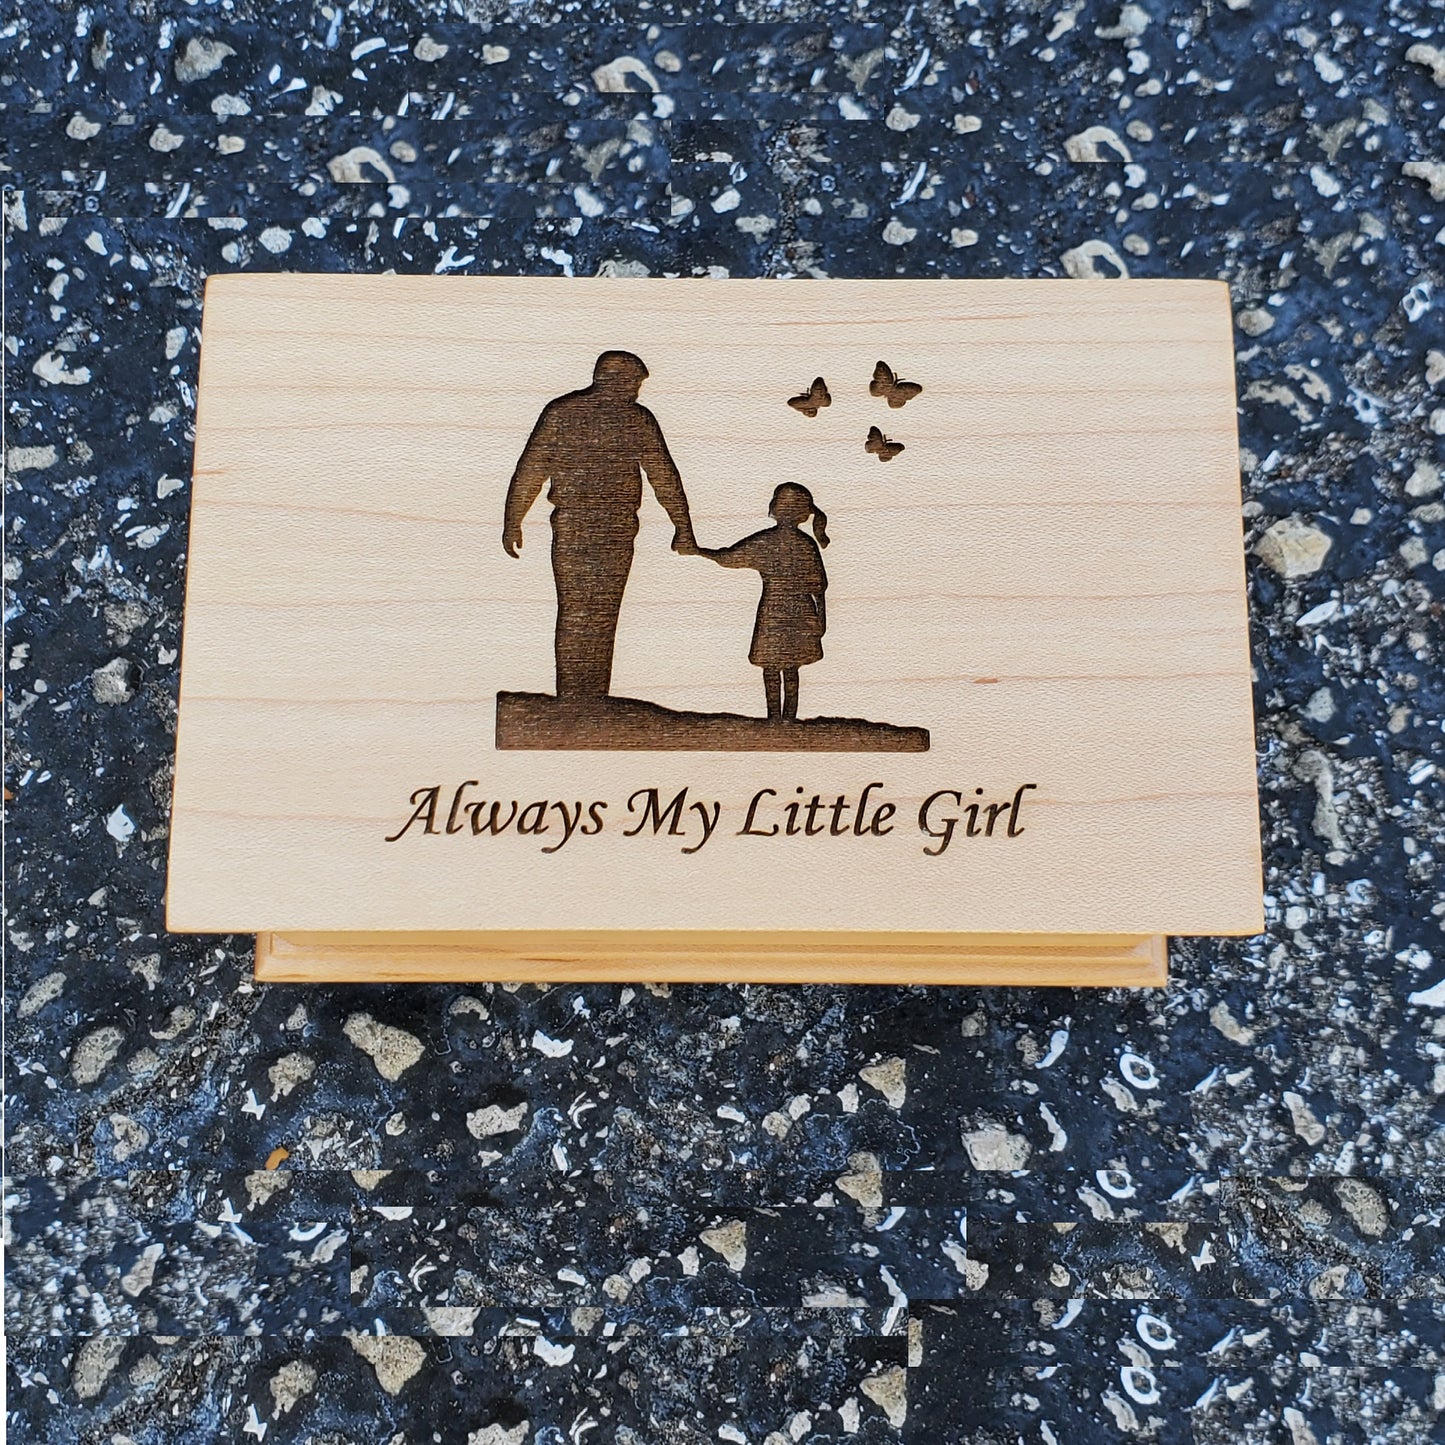 Always My Little Girl Music Jewelry Box with dad and daughter engraved on top